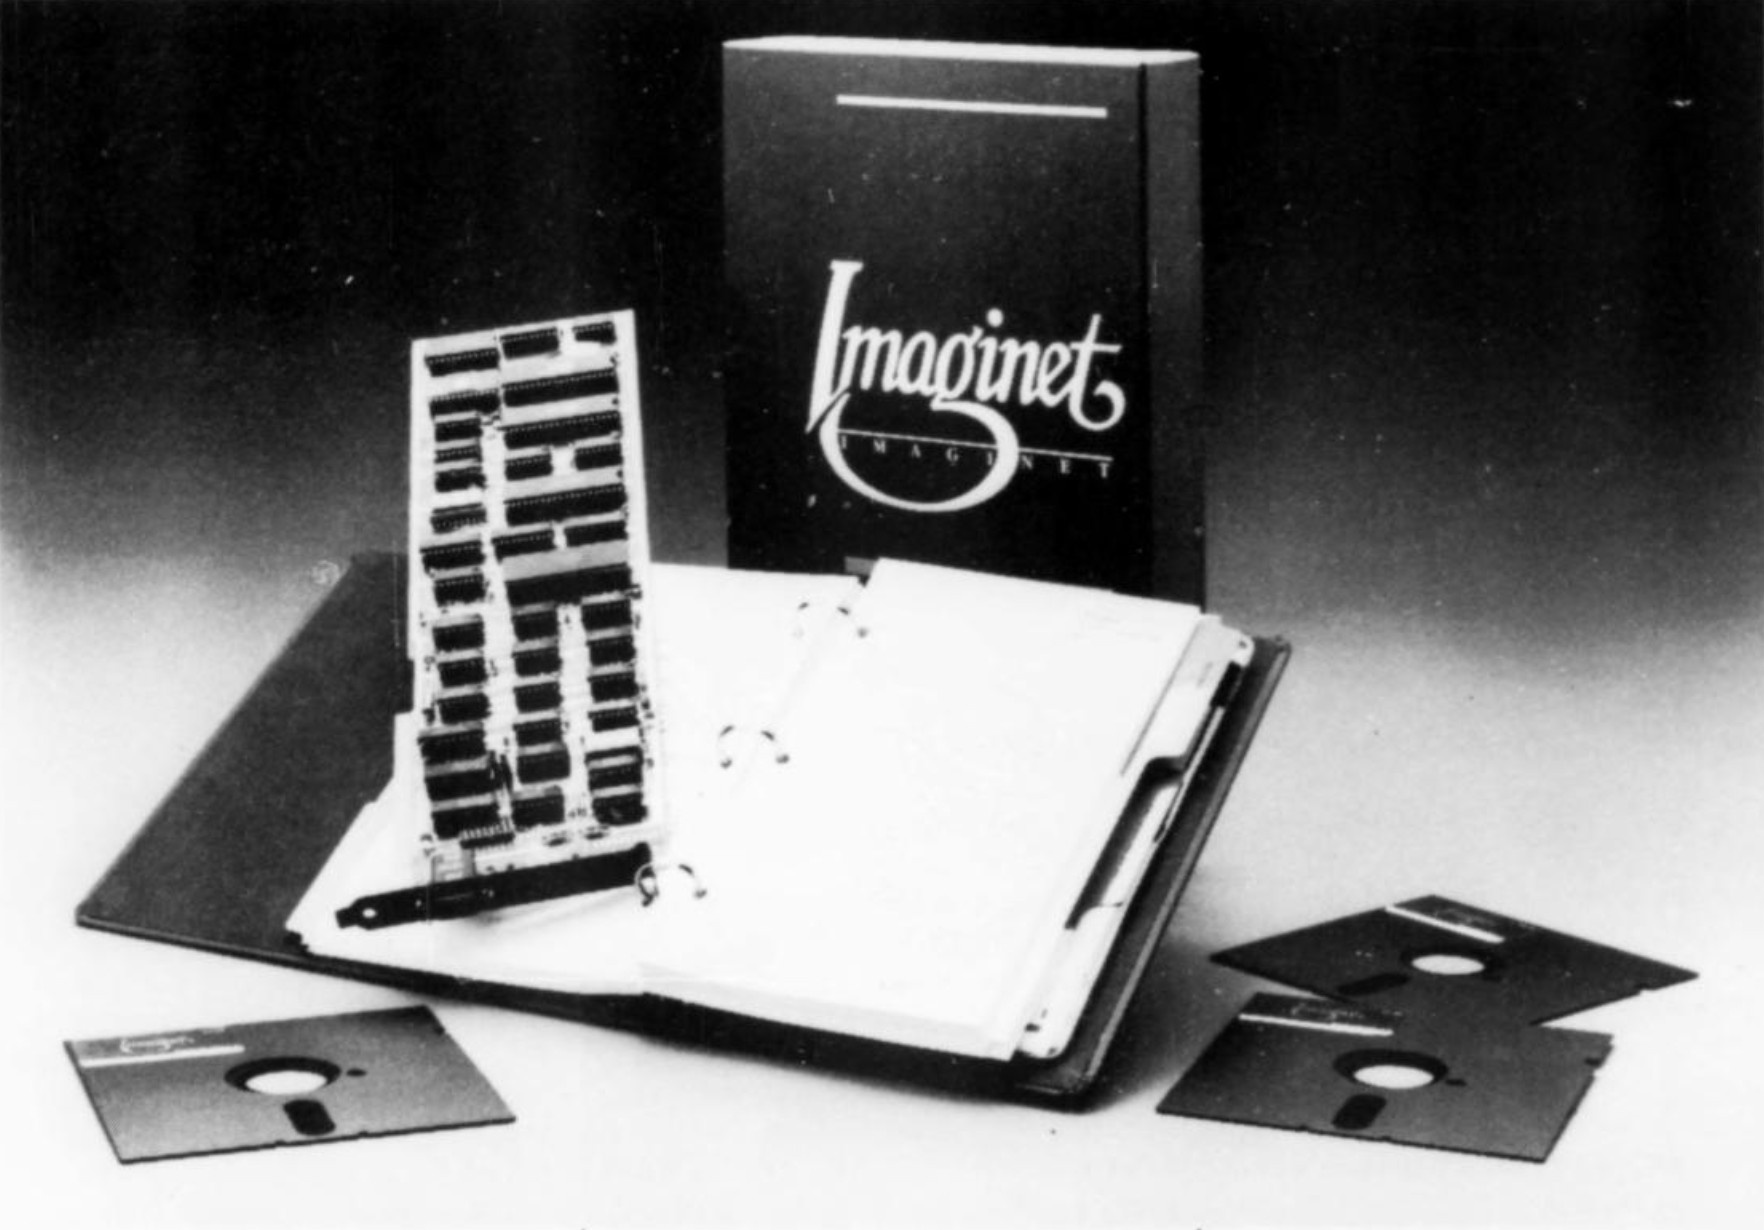 Boxed copy of Imaginet showing manual, floppy disks and ISA card